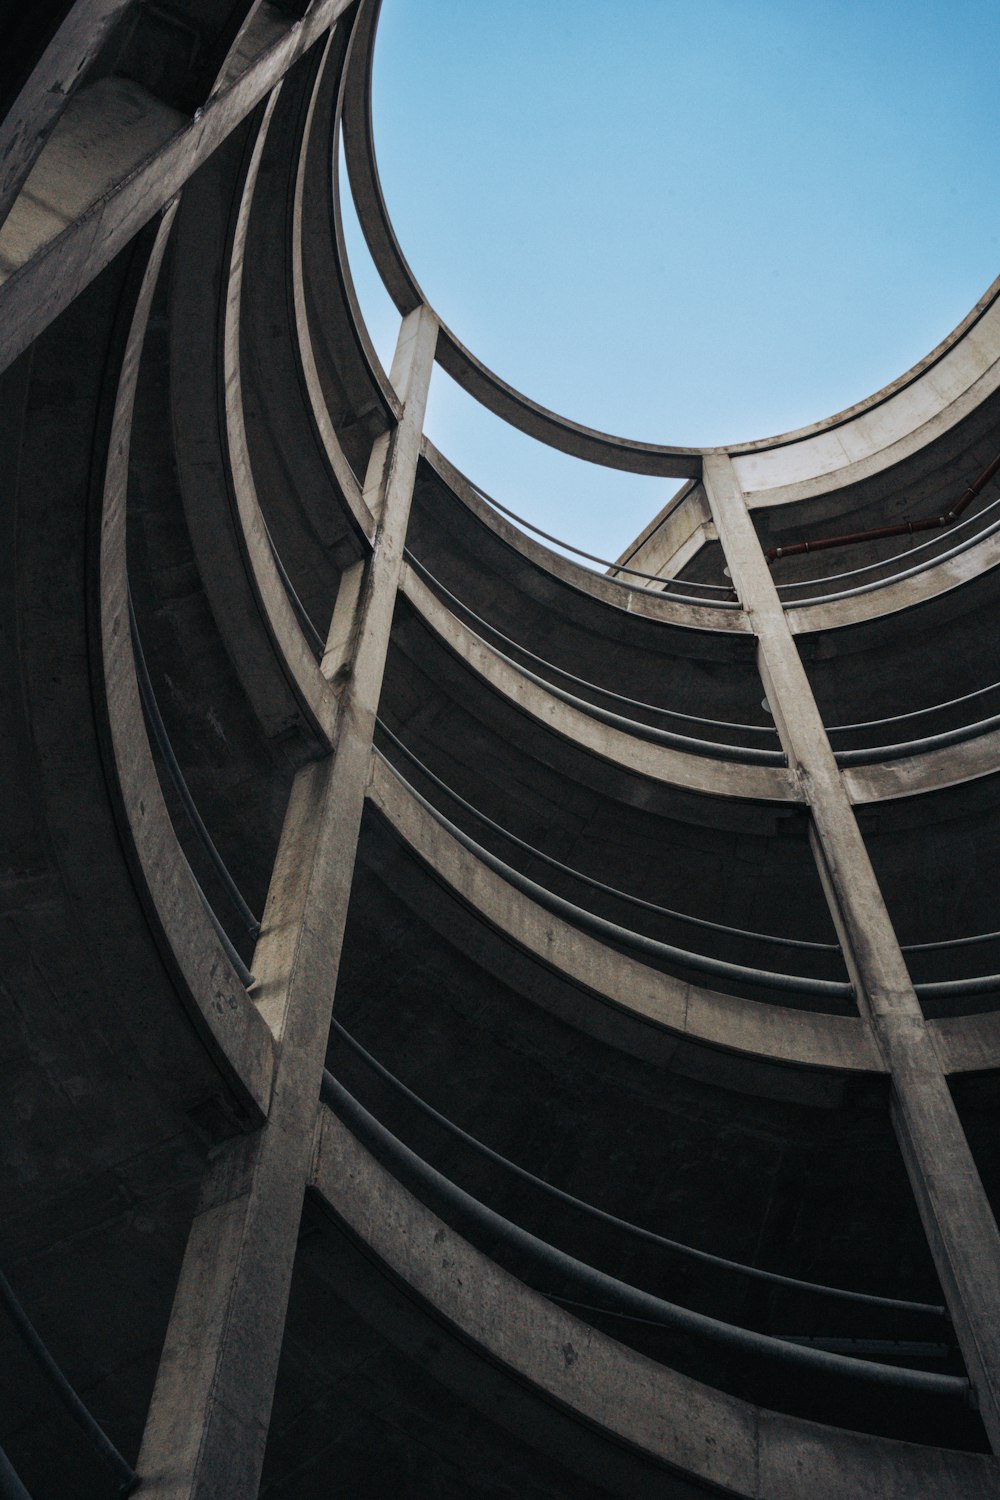 looking up at a circular concrete structure with a blue sky in the background